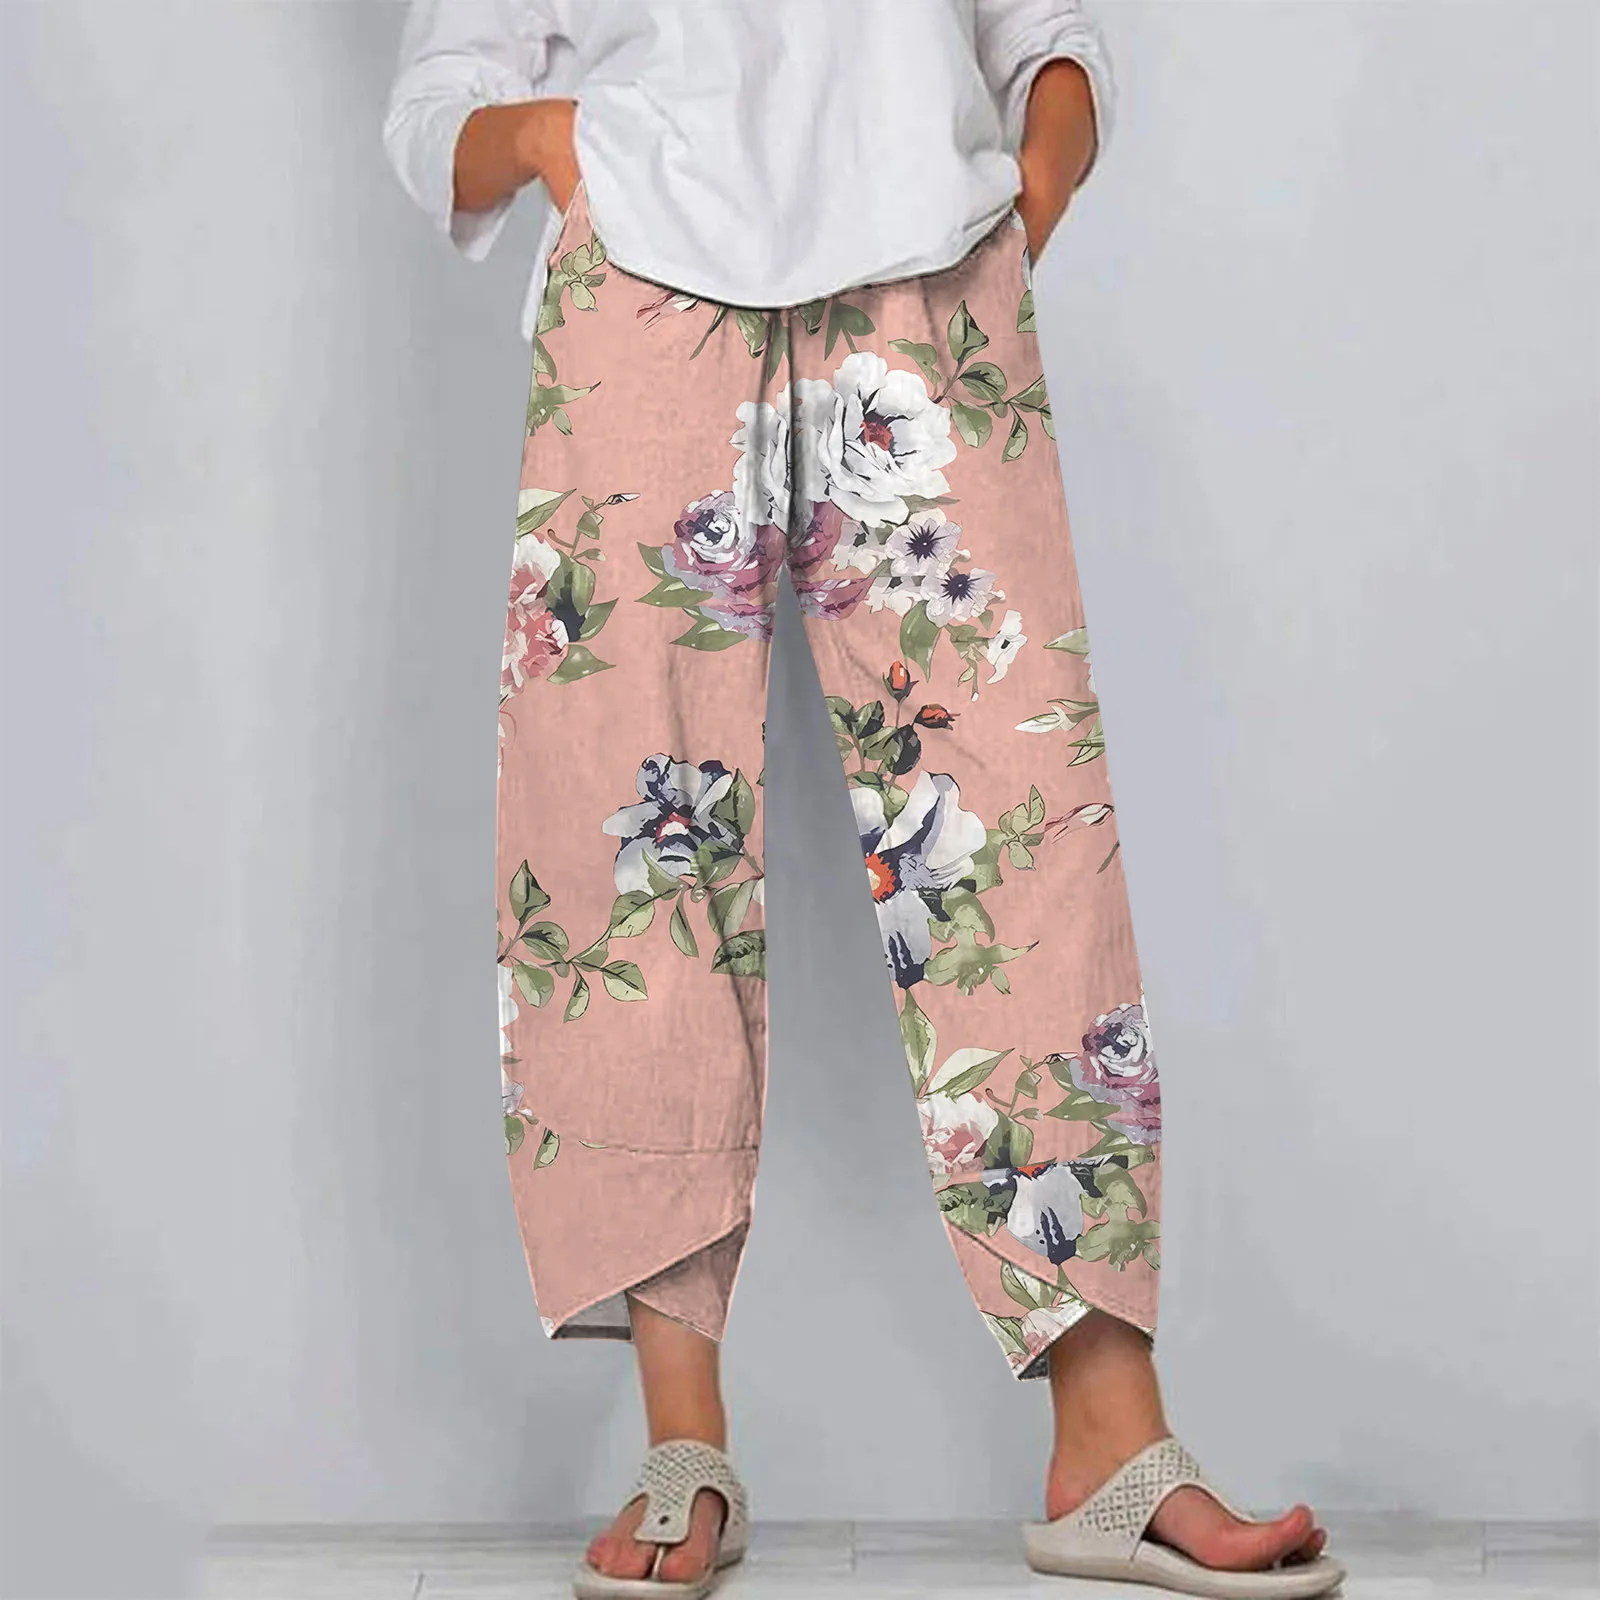 Buy Harem Pants, Plus Size Yoga Pants, Summer Pants, Pants With Pockets,  Lightweight Bohemian Trousers, Summer Trousers, Lounge Pant, Loose Pant  Online in India 